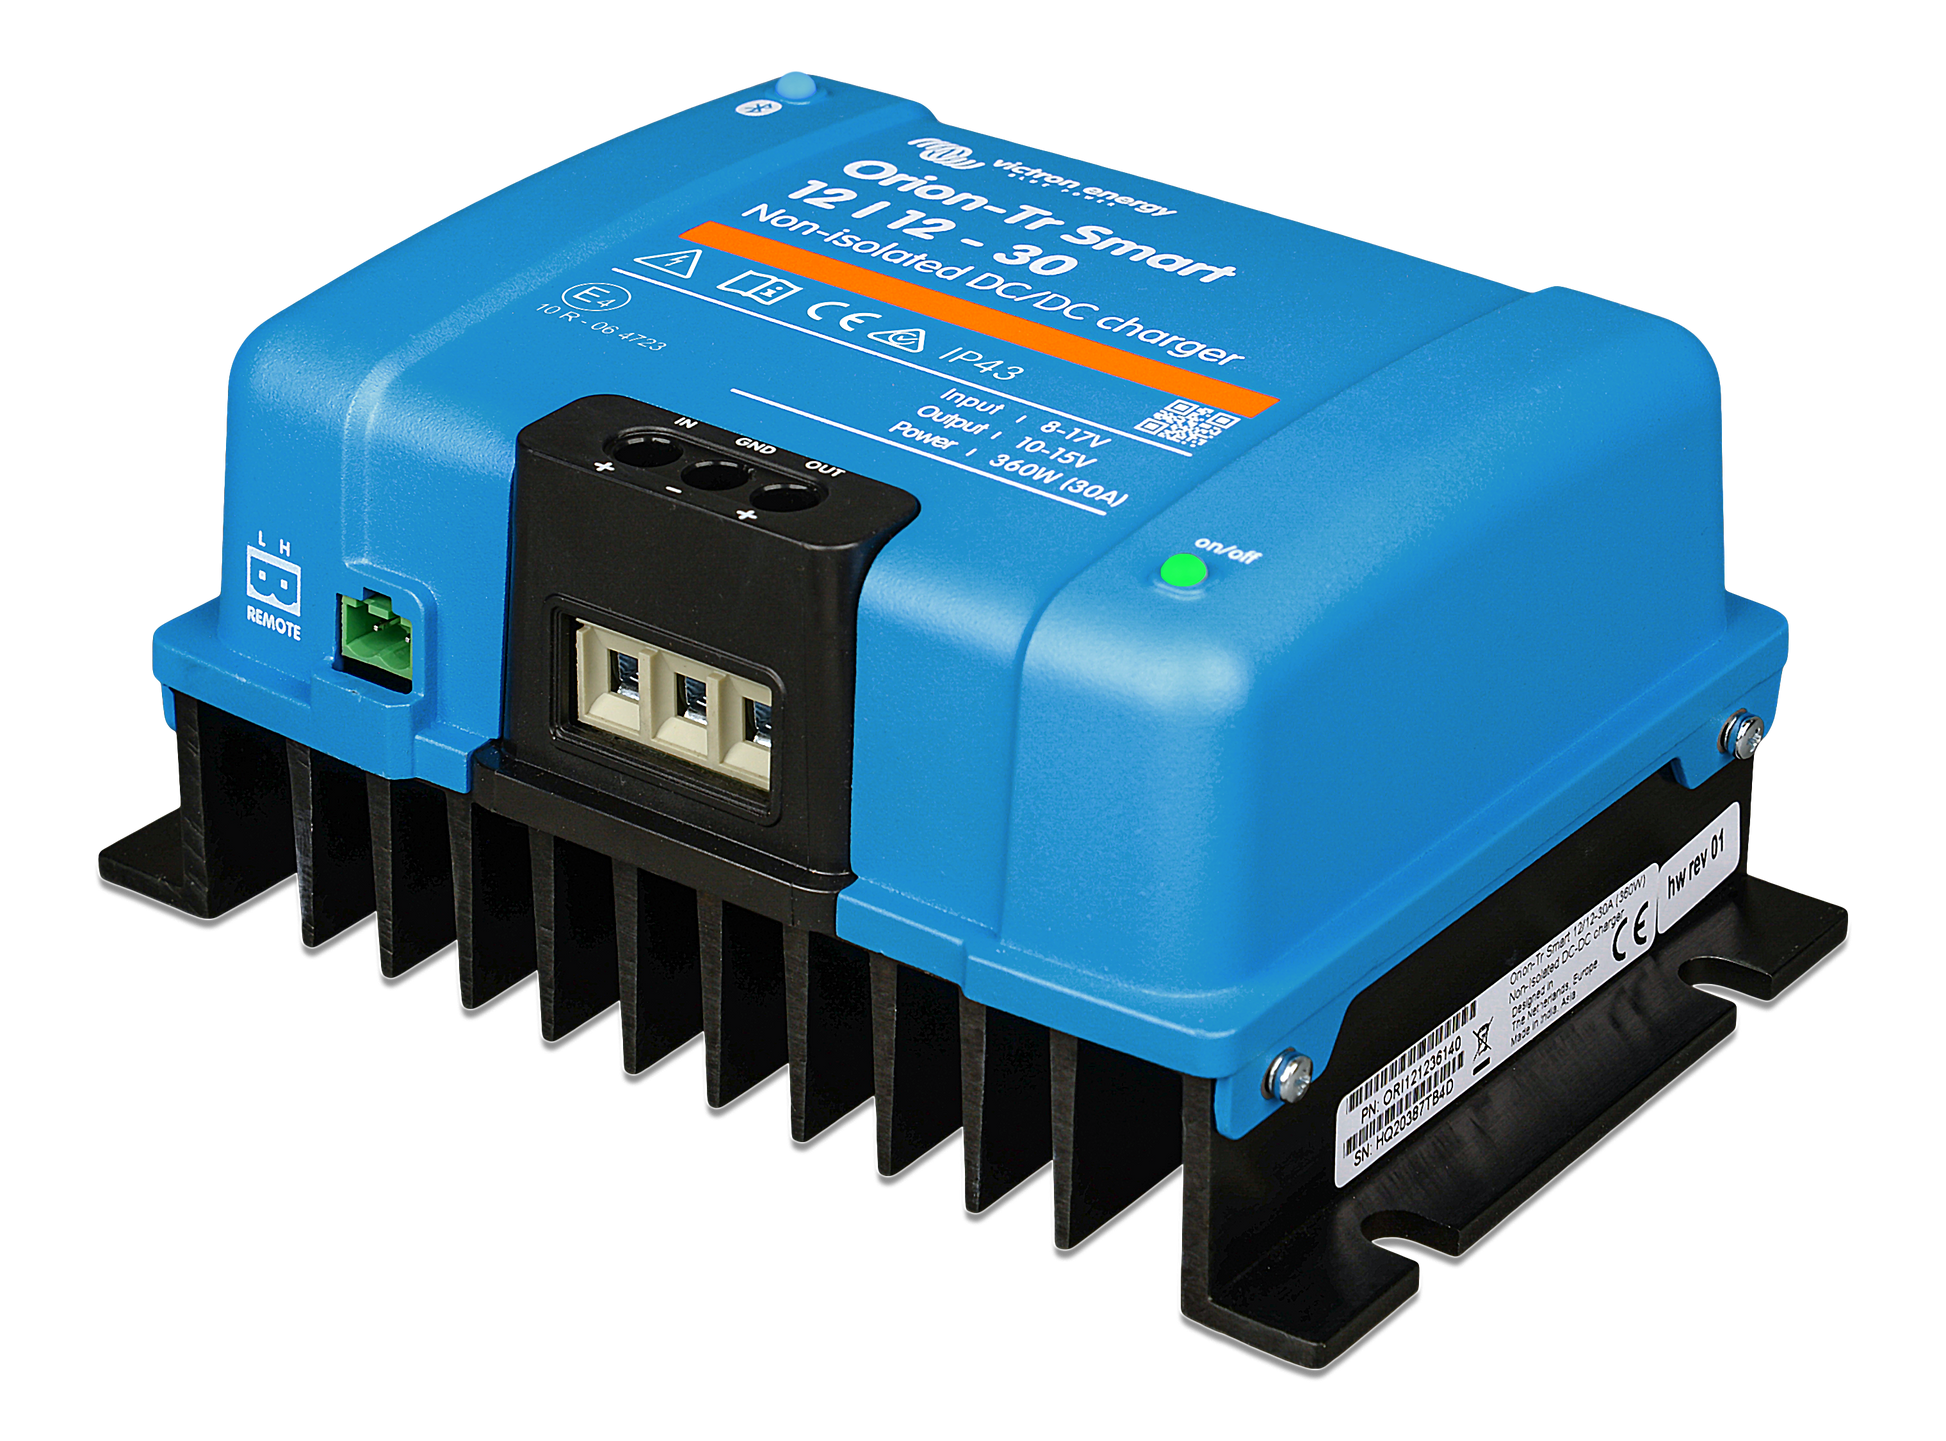 Orion-Tr Smart 12/12-30A Non-isolated DC-DC charger - Off Grid B.C. Technologies ltd